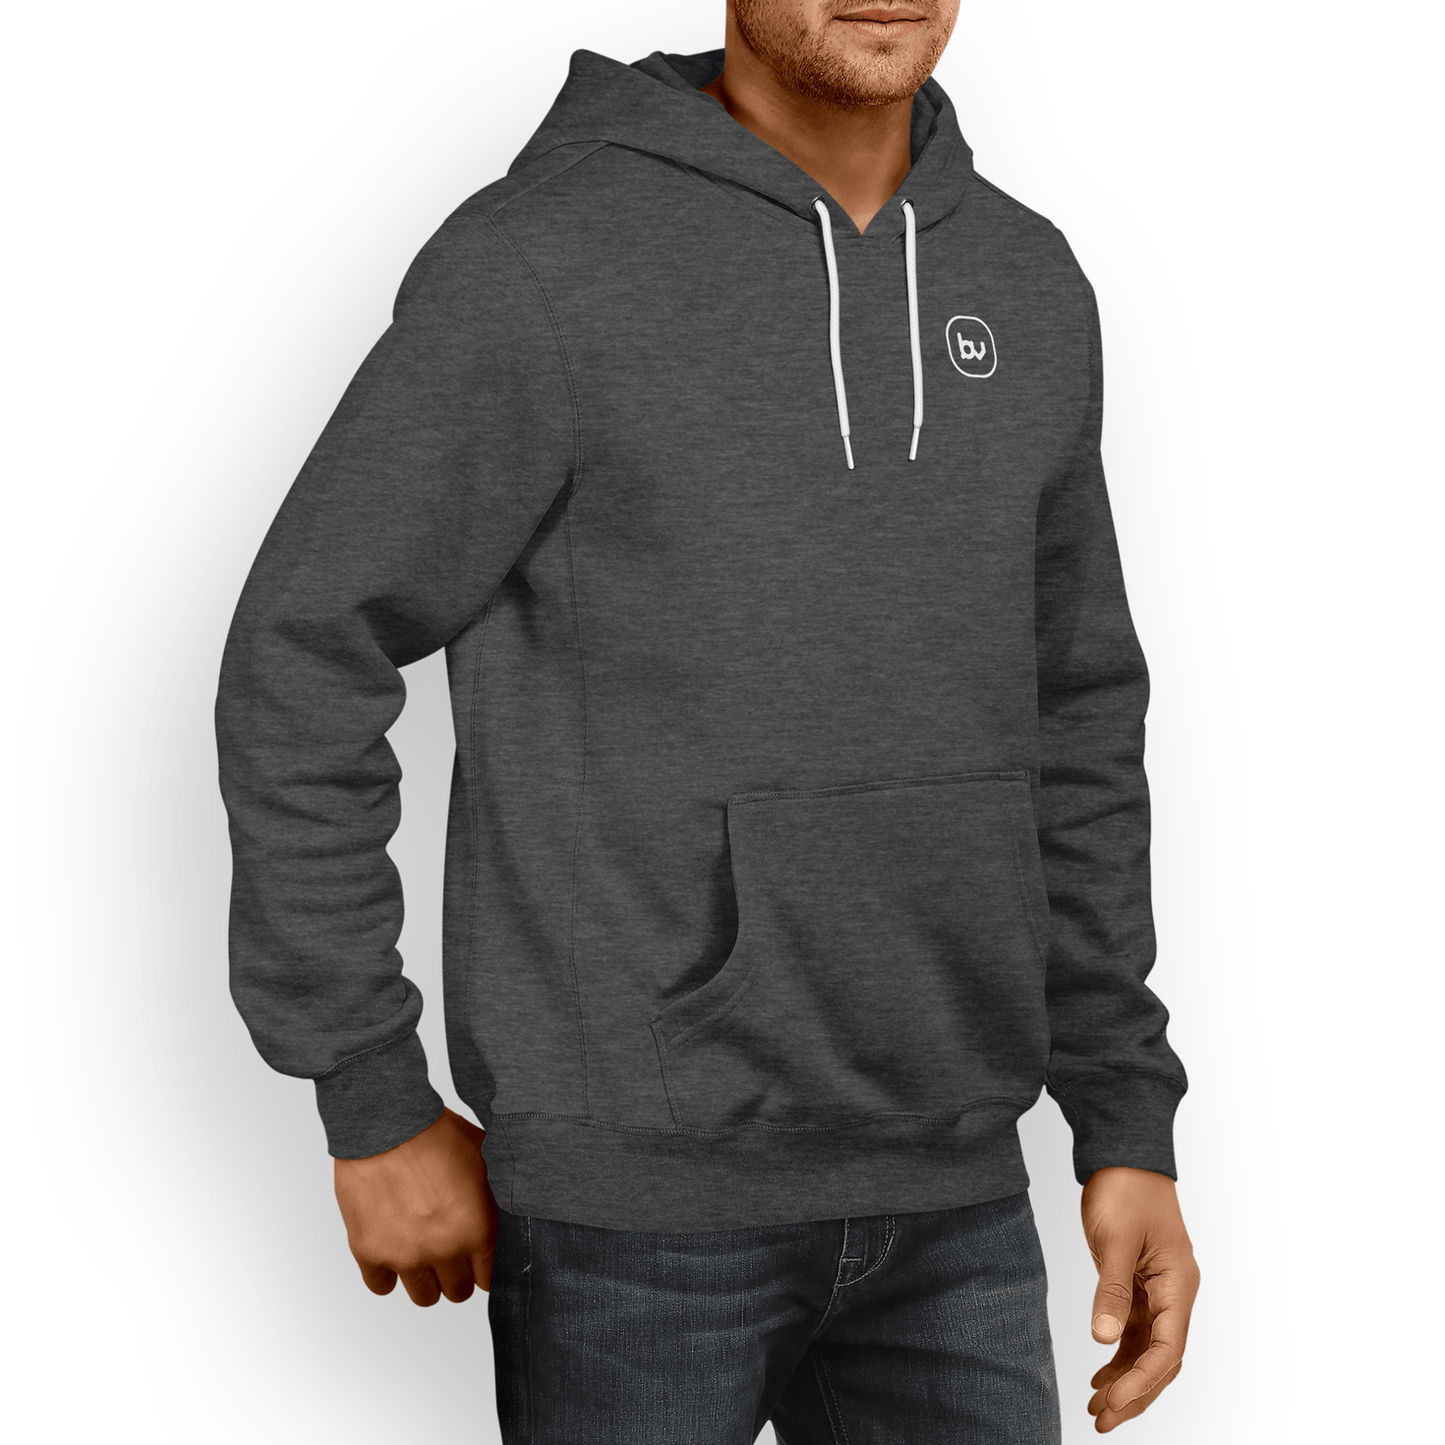 Bazarville Void HD S Hoodie - Charcoal Heather Grey